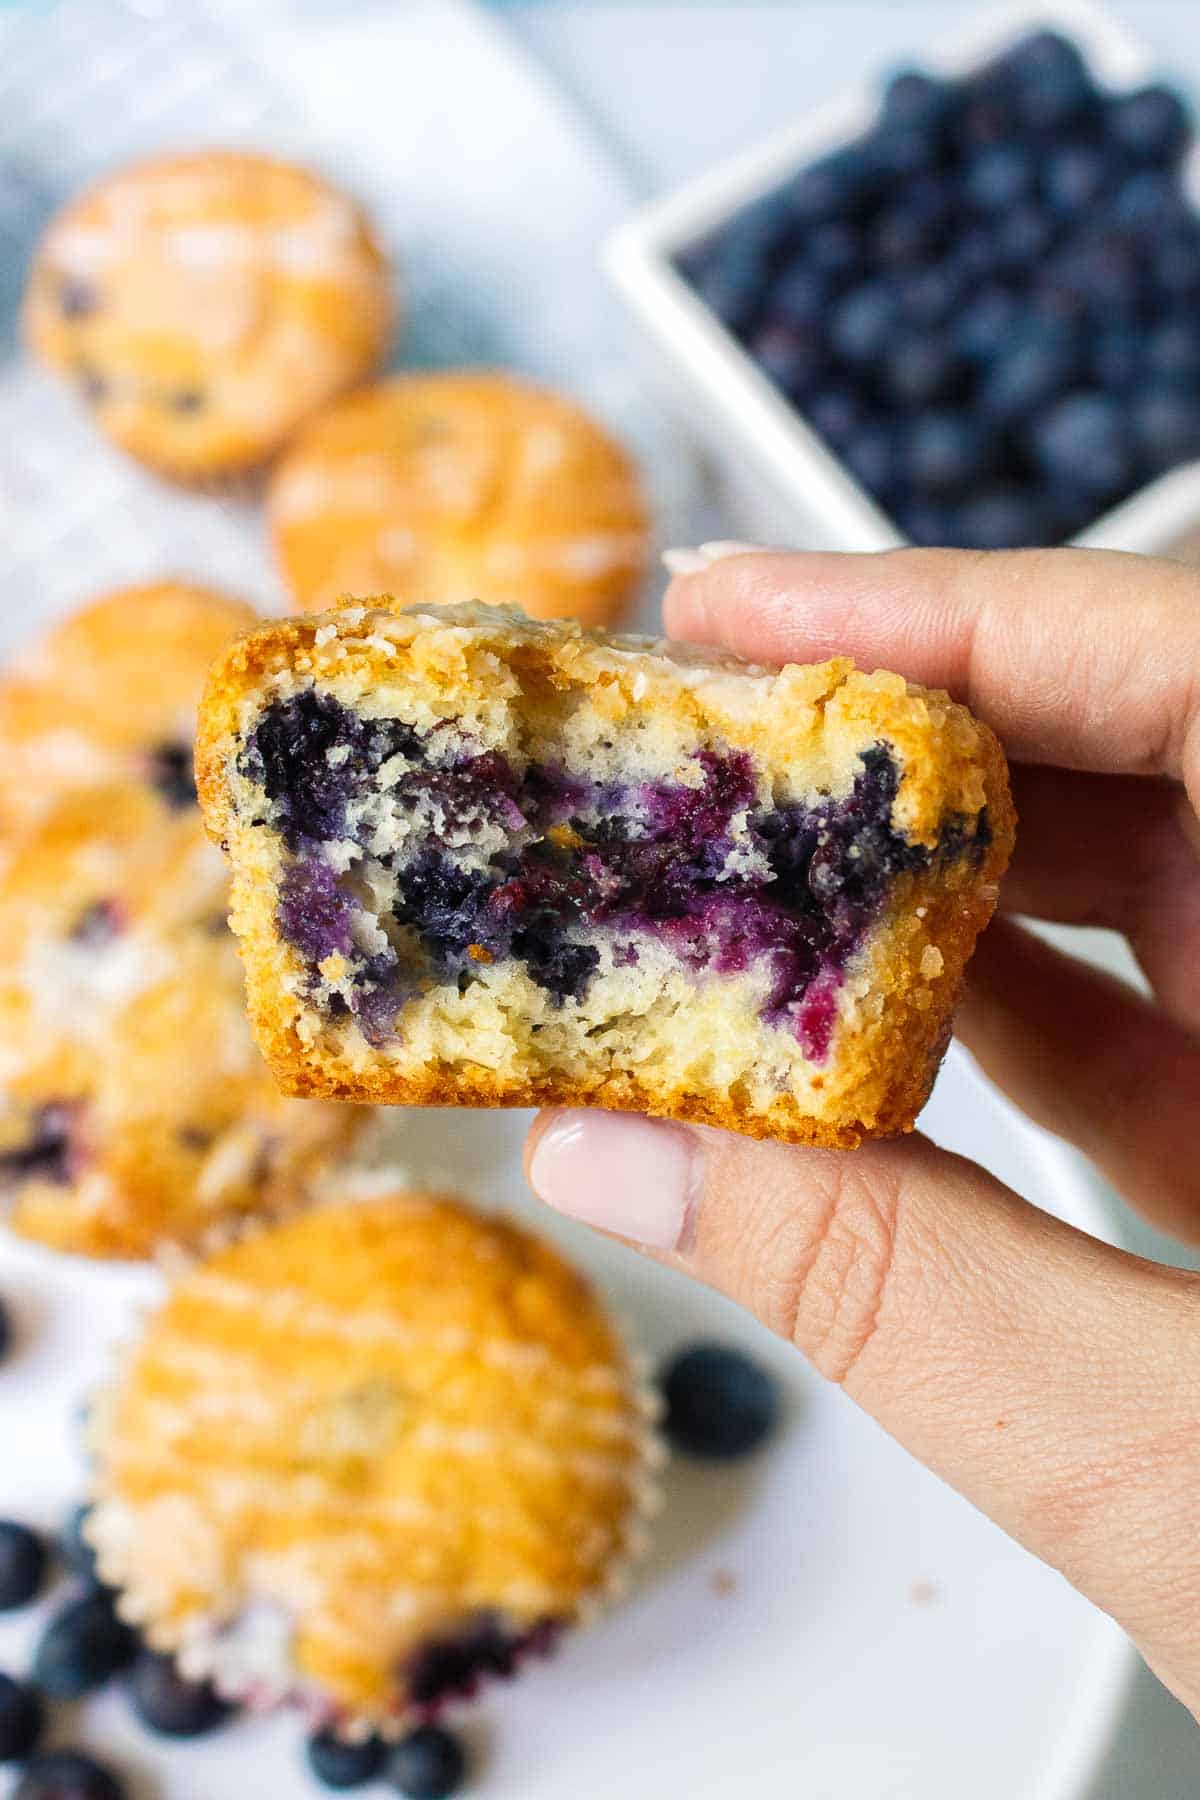 A bite is taken out of a blueberry muffin